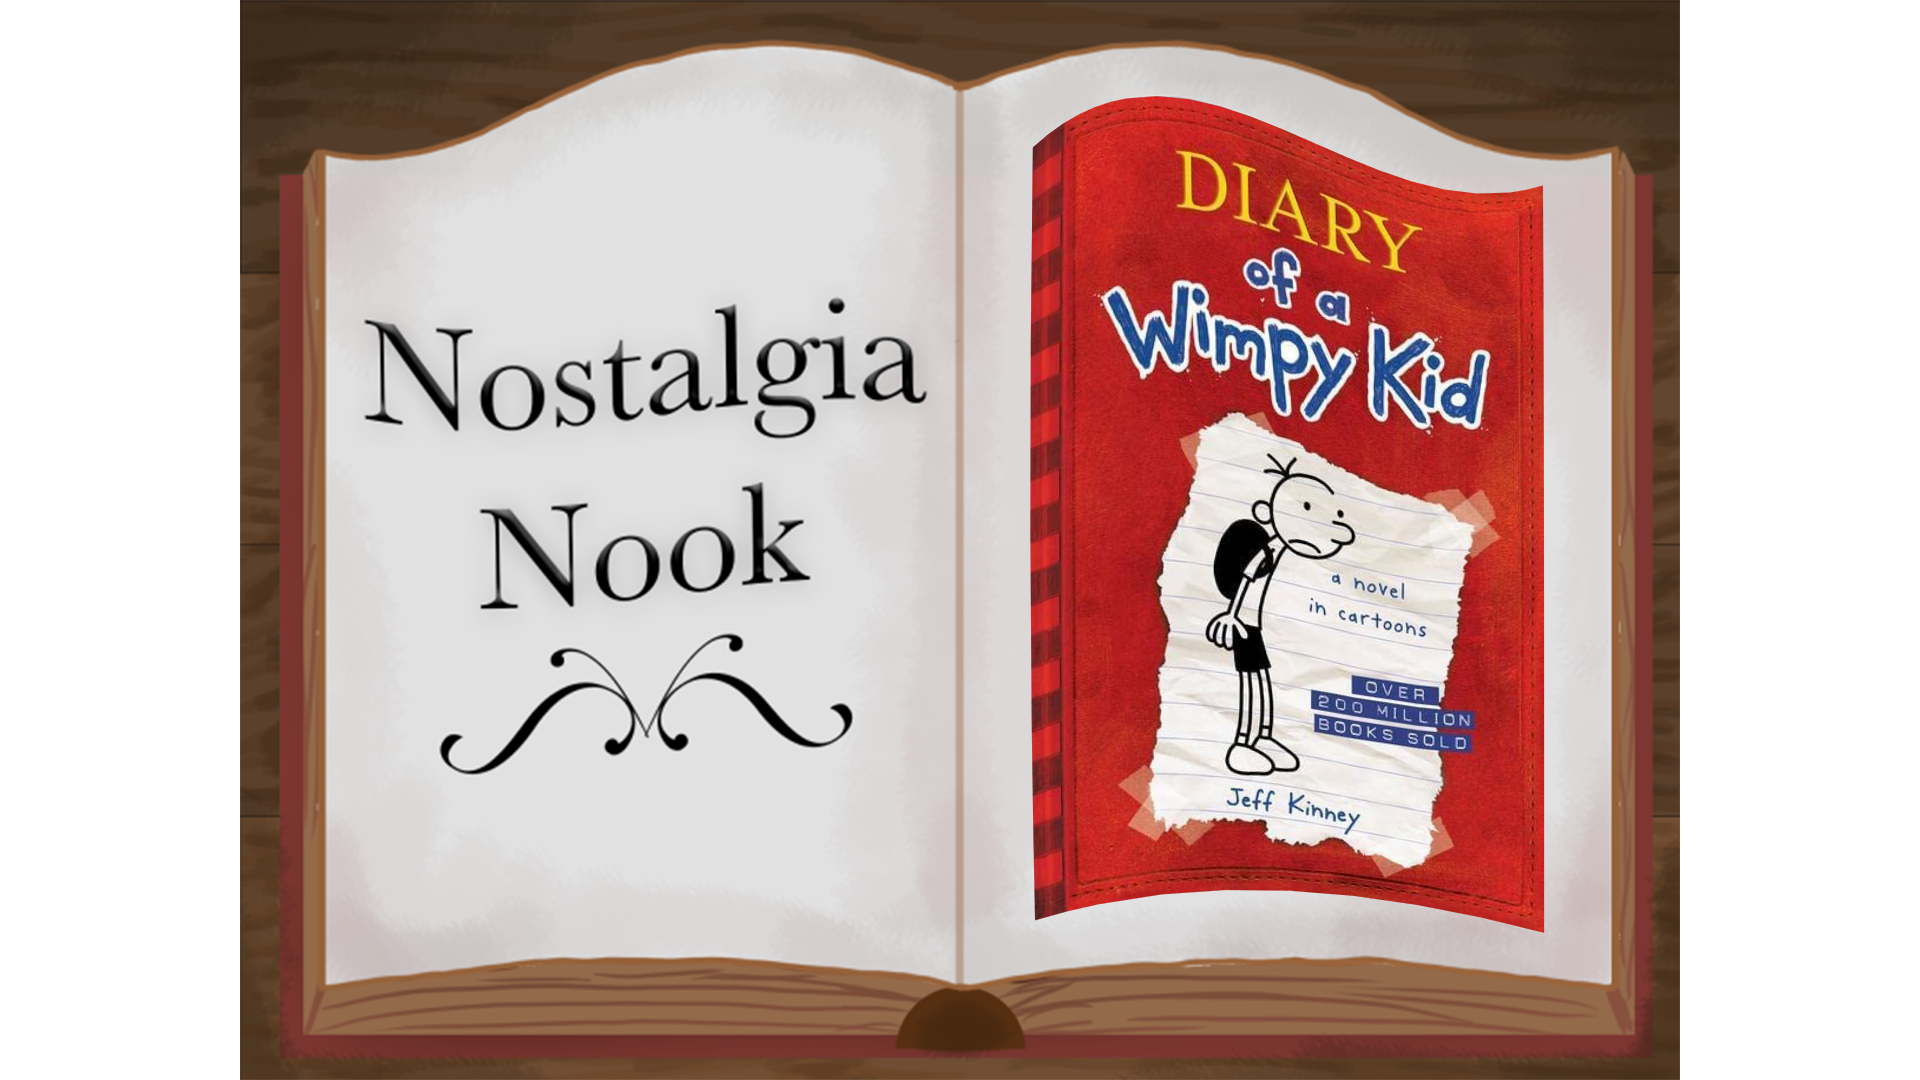 DIARY OF A WIMPY KID - my last year